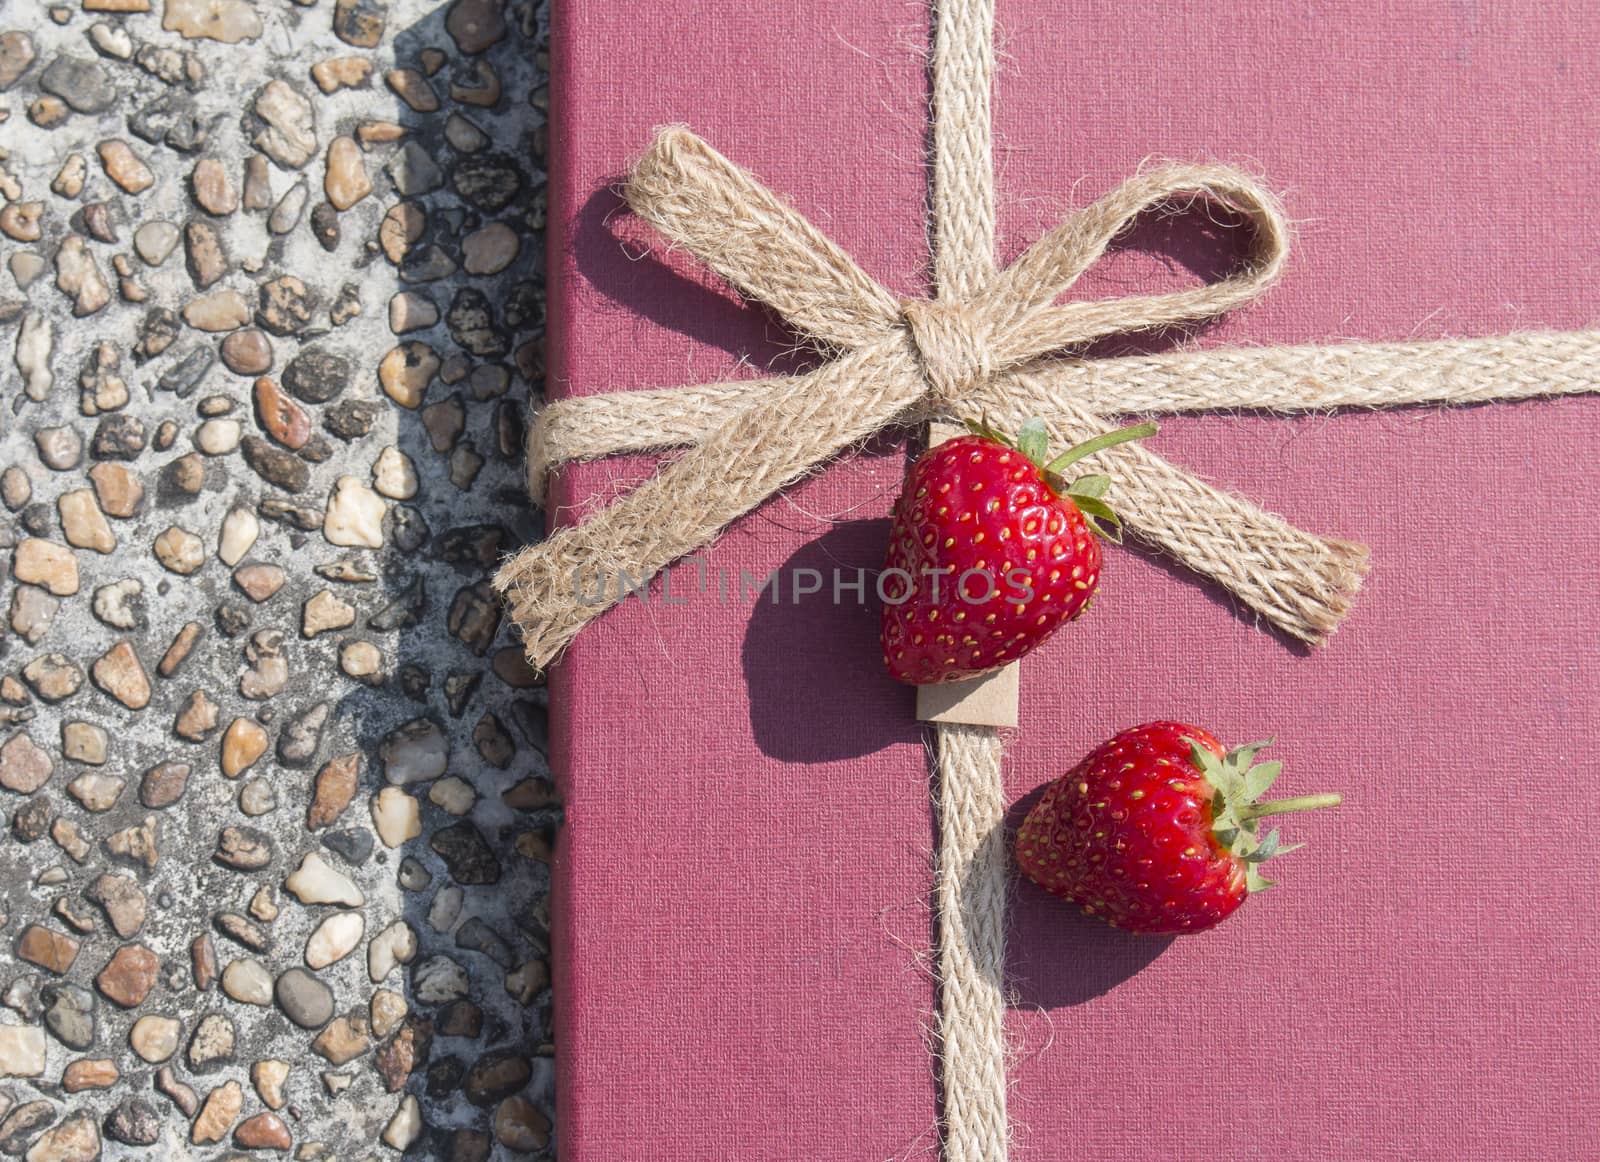 Two fresh strawbbies on gift box by Gobba17